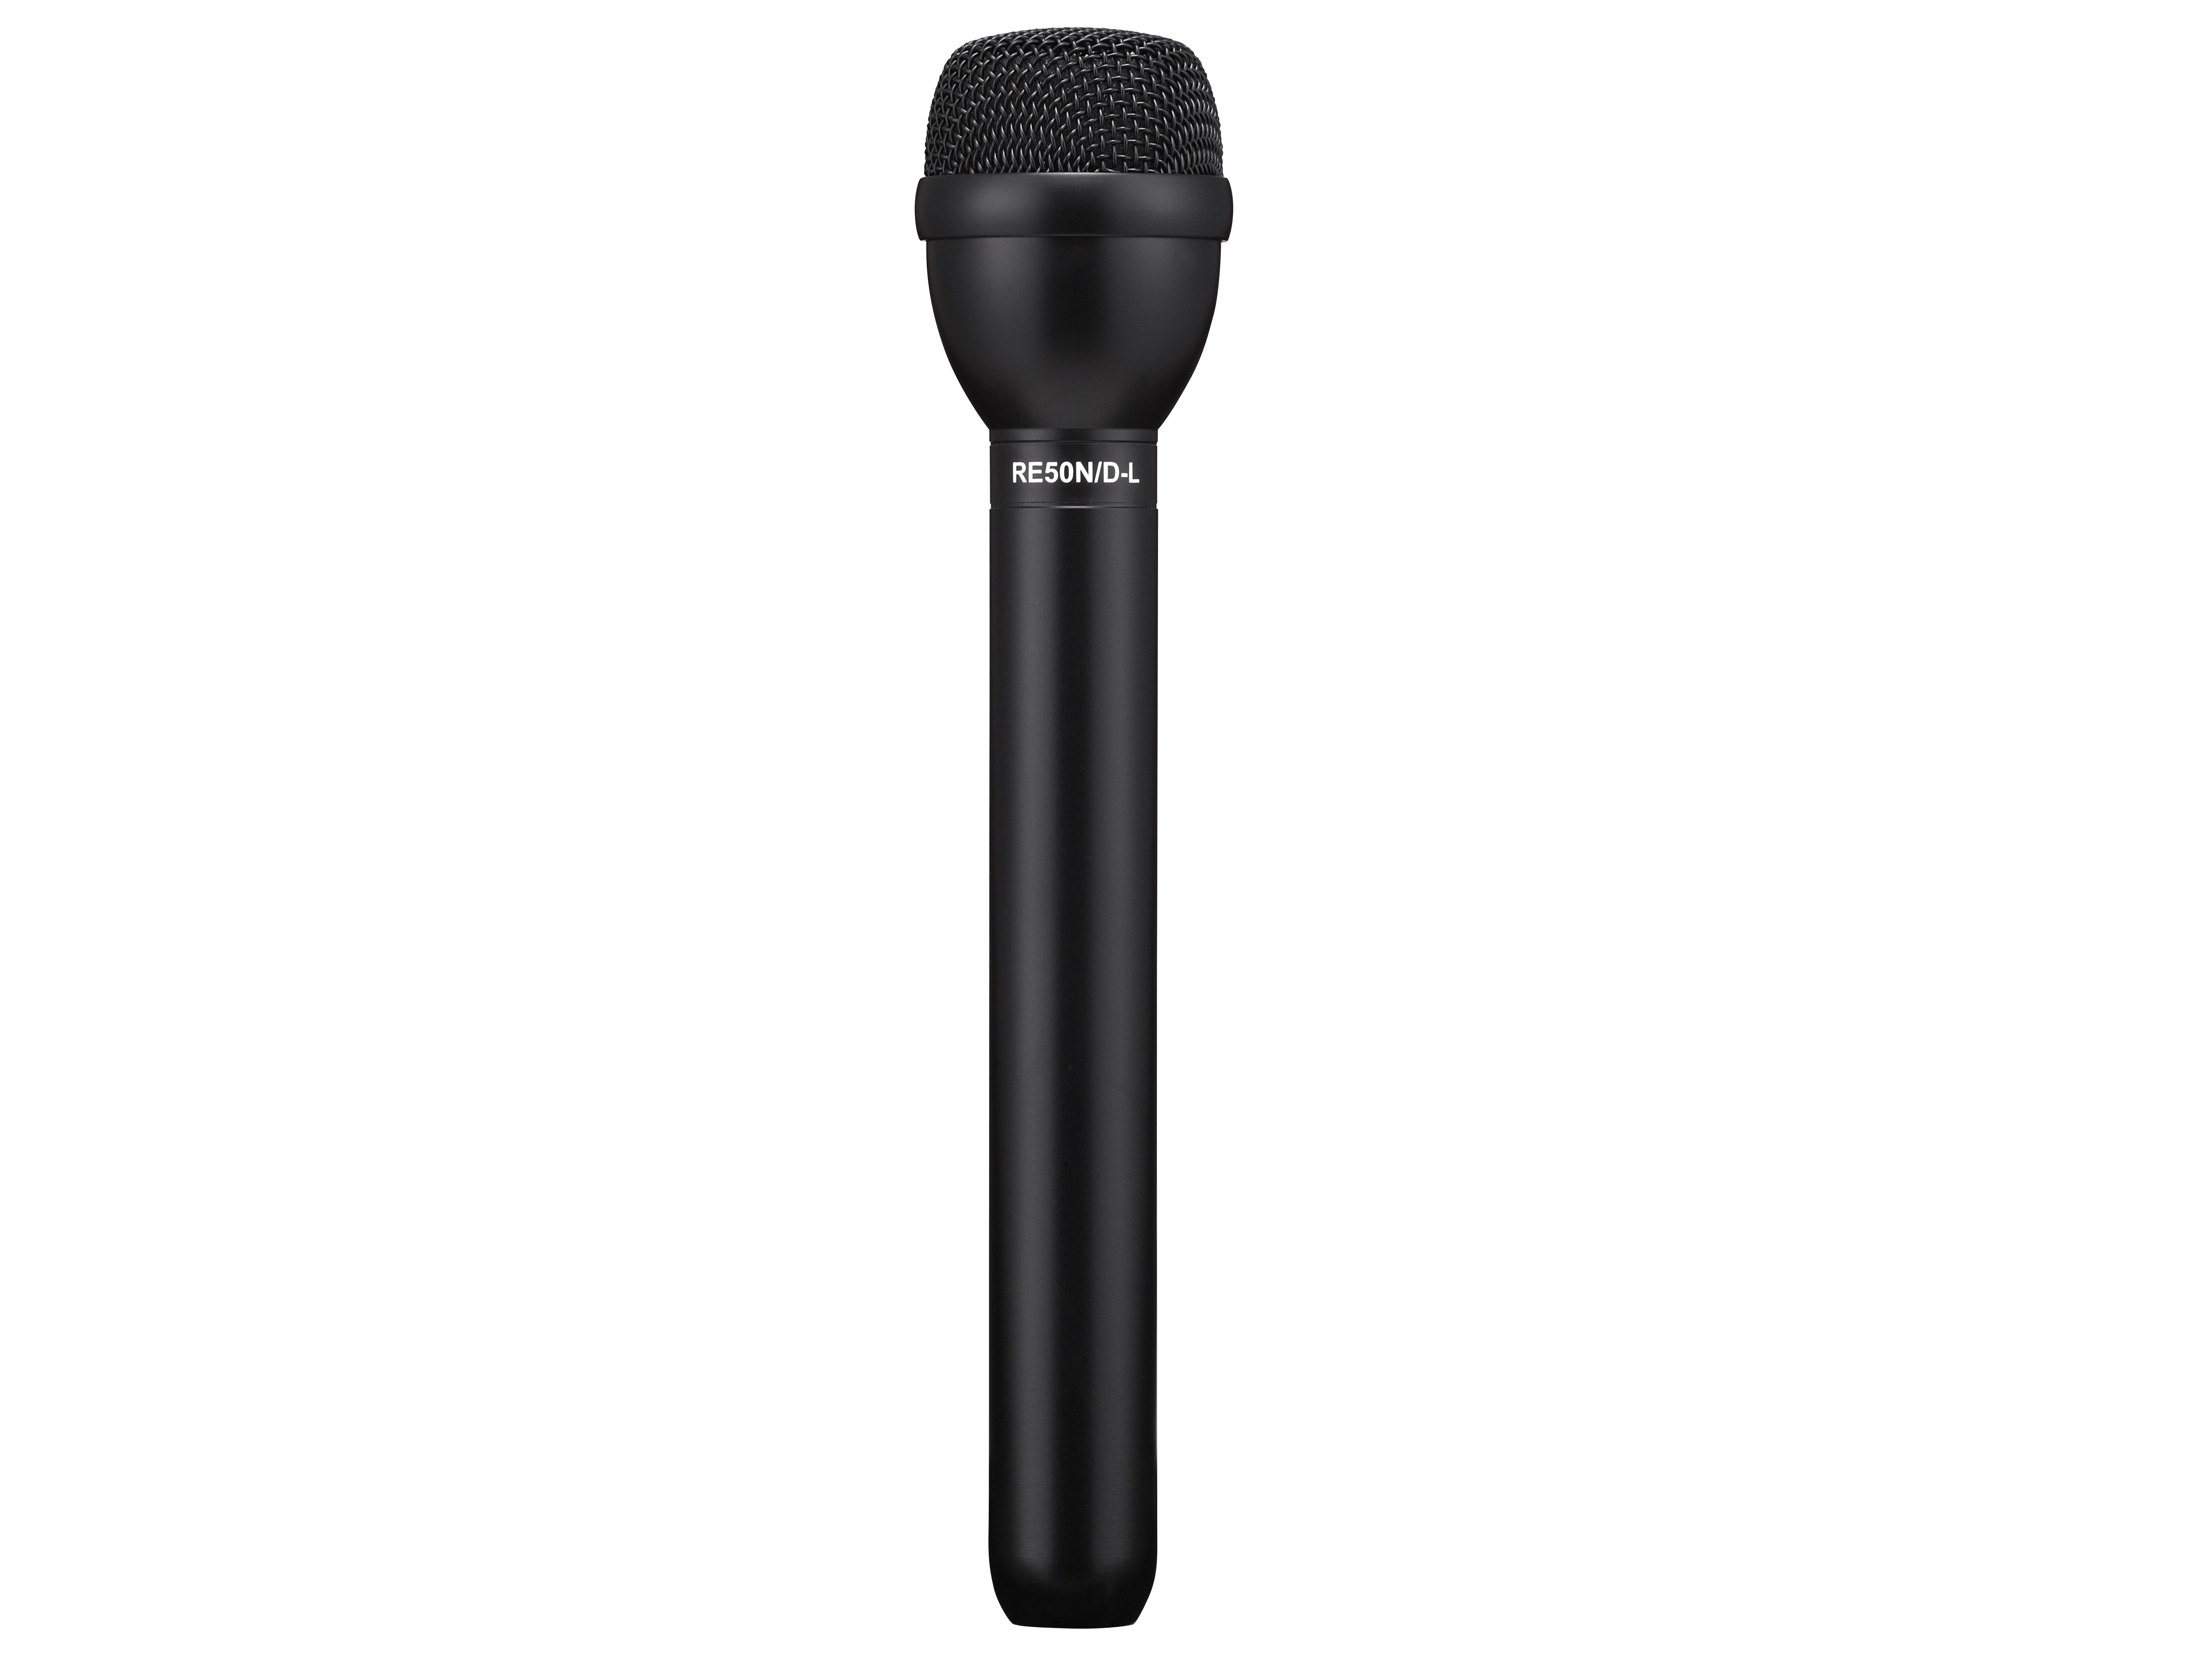 RE50N/DL N/DYM Dynamic Omnidirectional Interview Long Handle Microphone/Frequency Response 80Hz to 13kHz (Black) by Electro-Voice